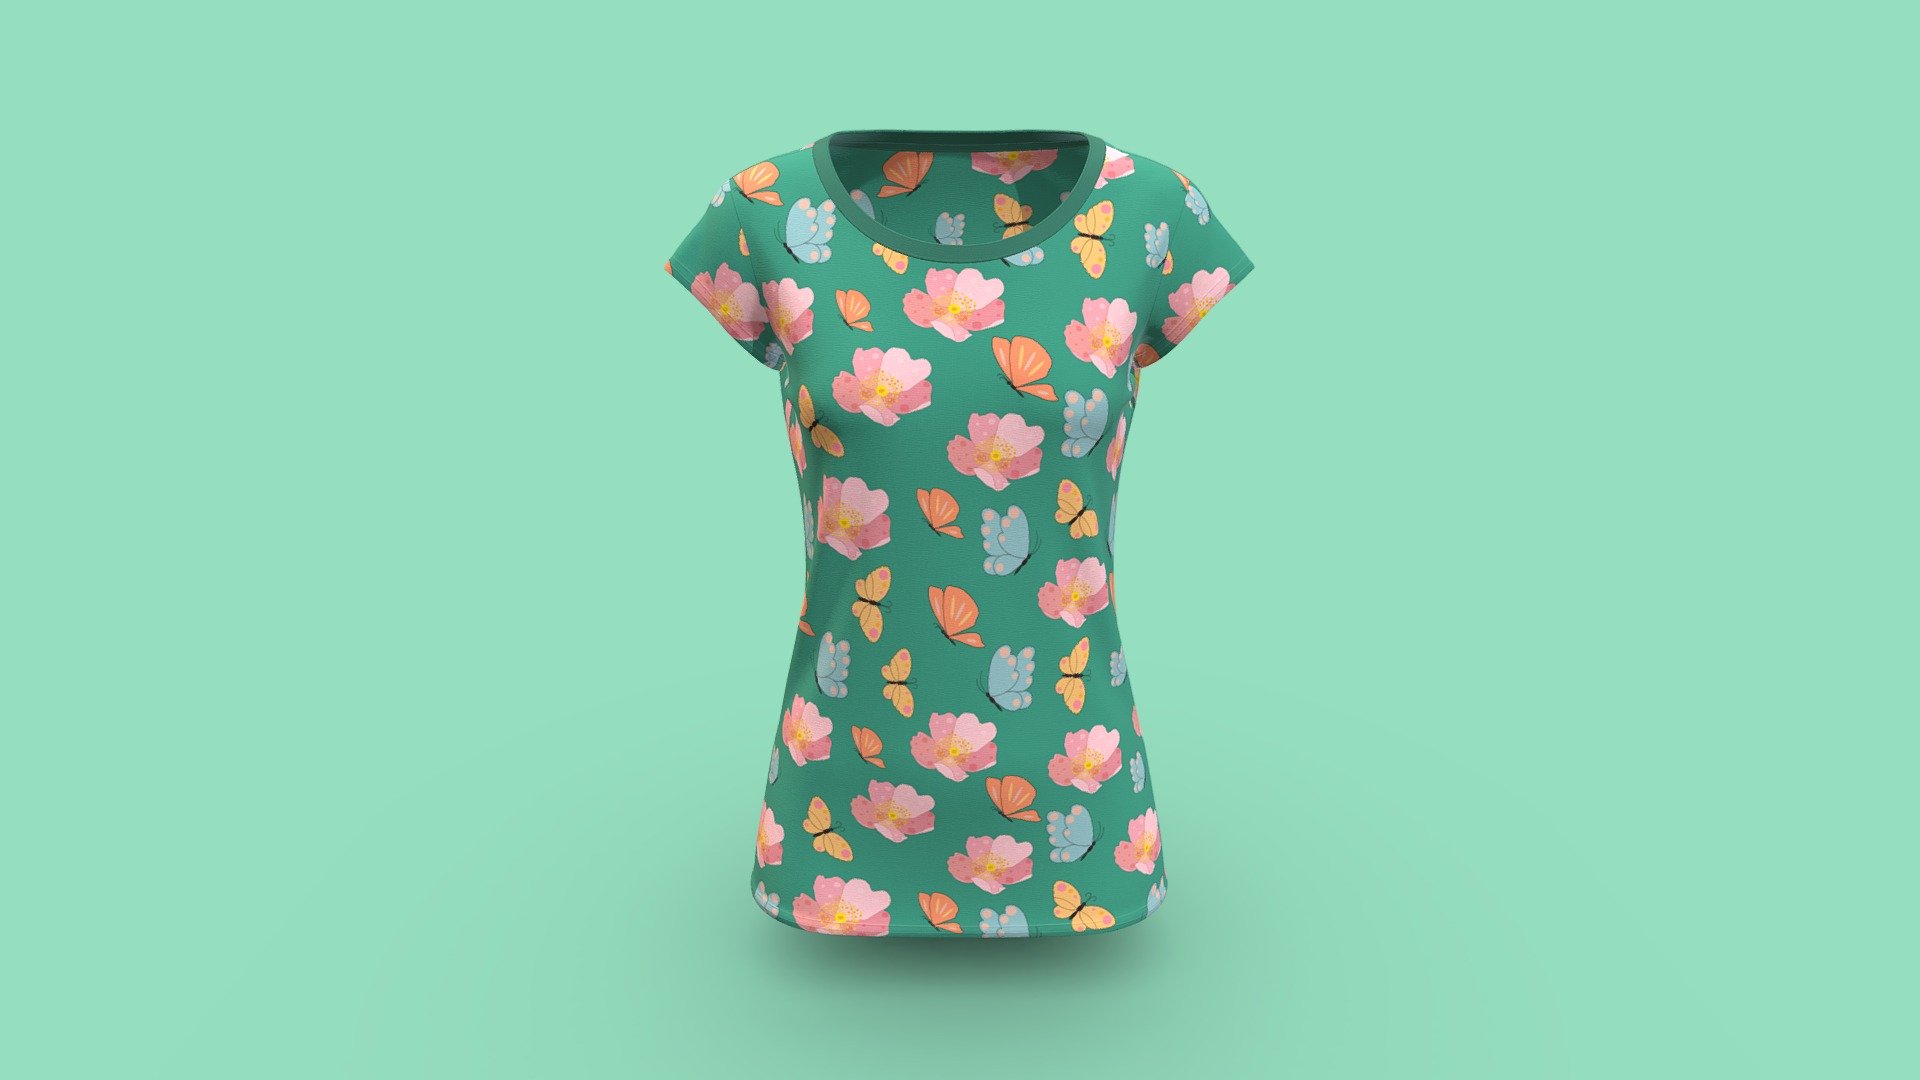 Cloth Title = Women Tops Design 

SKU = DG100215 

Category = Women 

Product Type = Tee 

Cloth Length = Regular 

Body Fit = Regular Fit 

Occasion = Casual  

Sleeve Style = Short Sleeve 


Our Services:

3D Apparel Design.

OBJ,FBX,GLTF Making with High/Low Poly.

Fabric Digitalization.

Mockup making.

3D Teck Pack.

Pattern Making.

2D Illustration.

Cloth Animation and 360 Spin Video.


Contact us:- 

Email: info@digitalfashionwear.com 

Website: https://digitalfashionwear.com 


We designed all the types of cloth specially focused on product visualization, e-commerce, fitting, and production. 

We will design: 

T-shirts 

Polo shirts 

Hoodies 

Sweatshirt 

Jackets 

Shirts 

TankTops 

Trousers 

Bras 

Underwear 

Blazer 

Aprons 

Leggings 

and All Fashion items. 





Our goal is to make sure what we provide you, meets your demand 3d model